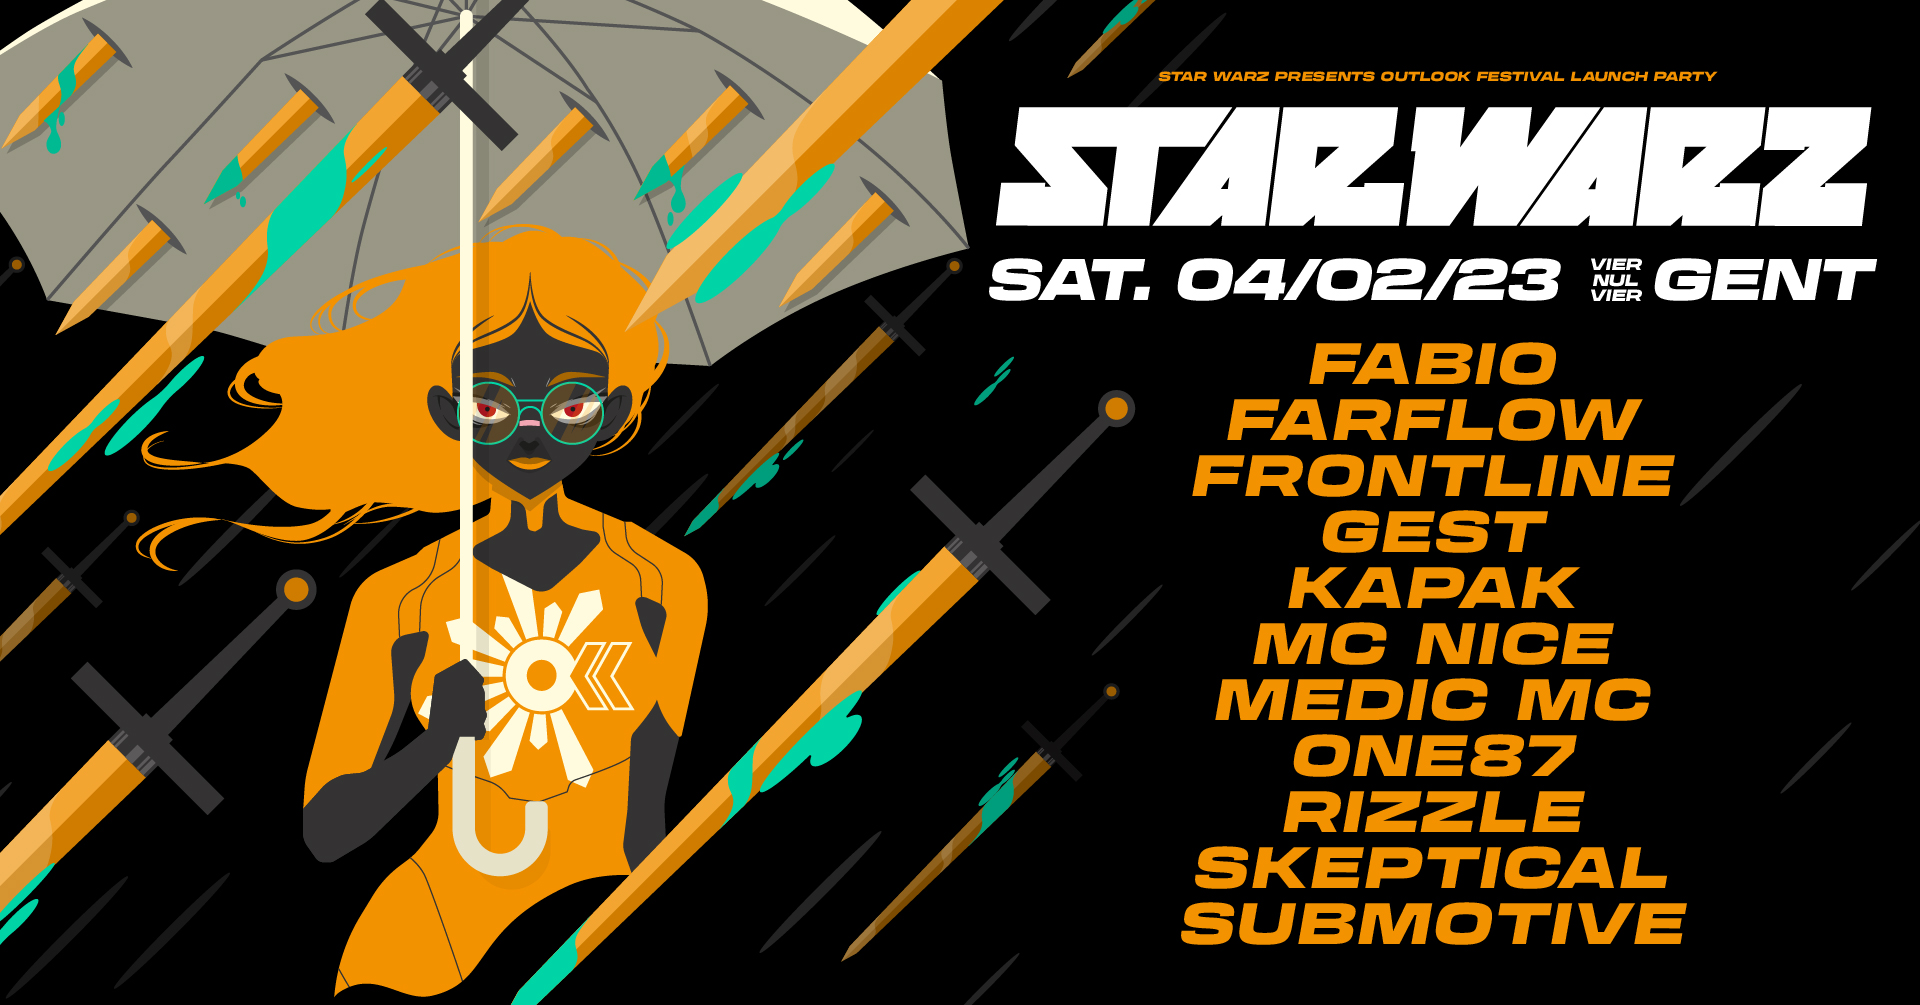 Star Warz presents Outlook Launch Party